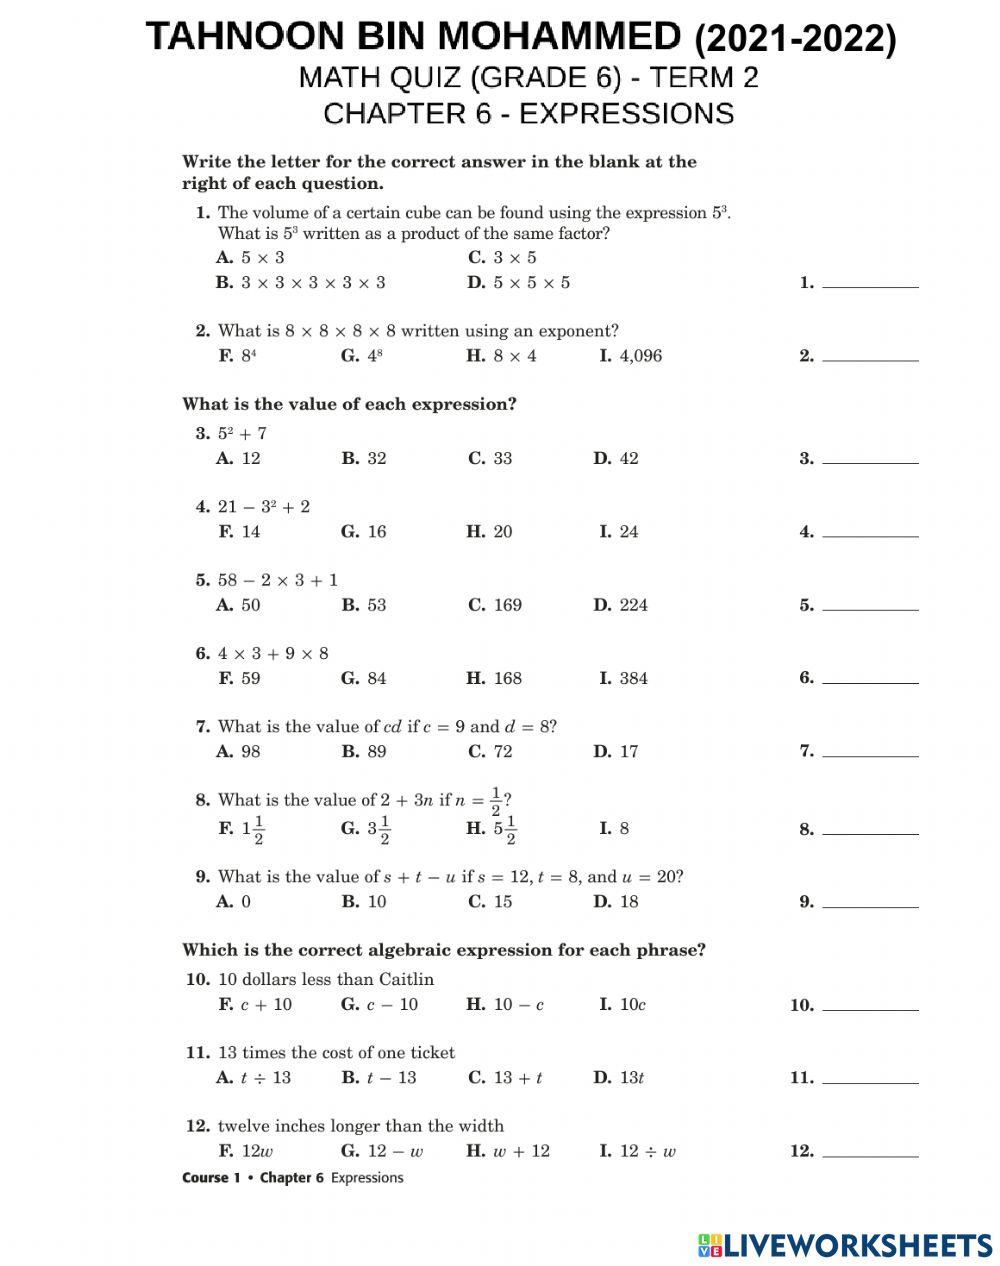 Math worksheet - chapter 6 - expressions